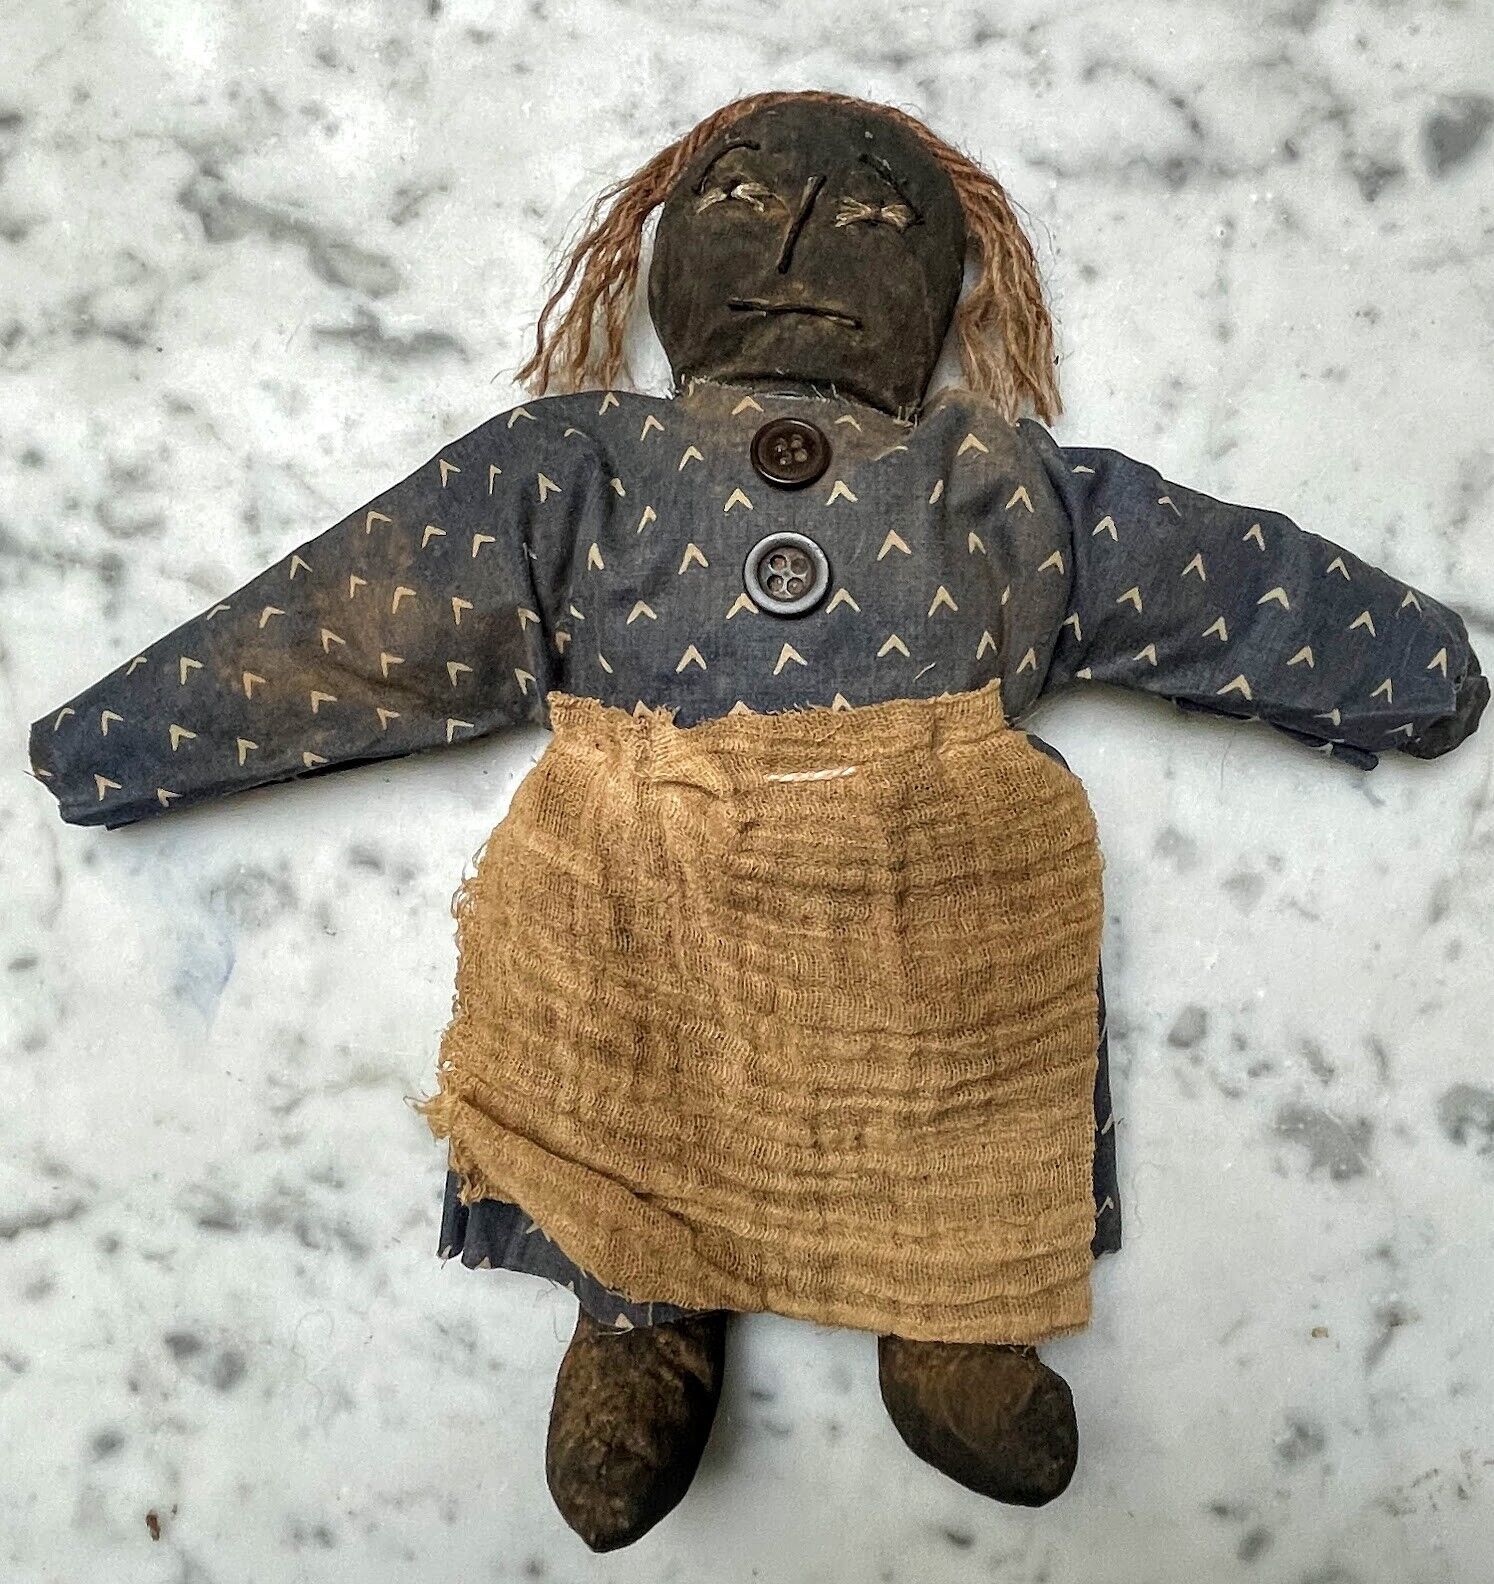 Primitive Farmhouse 12&quot; Maggie Black Rag Doll Dress and Apron Handcrafted - The Primitive Pineapple Collection